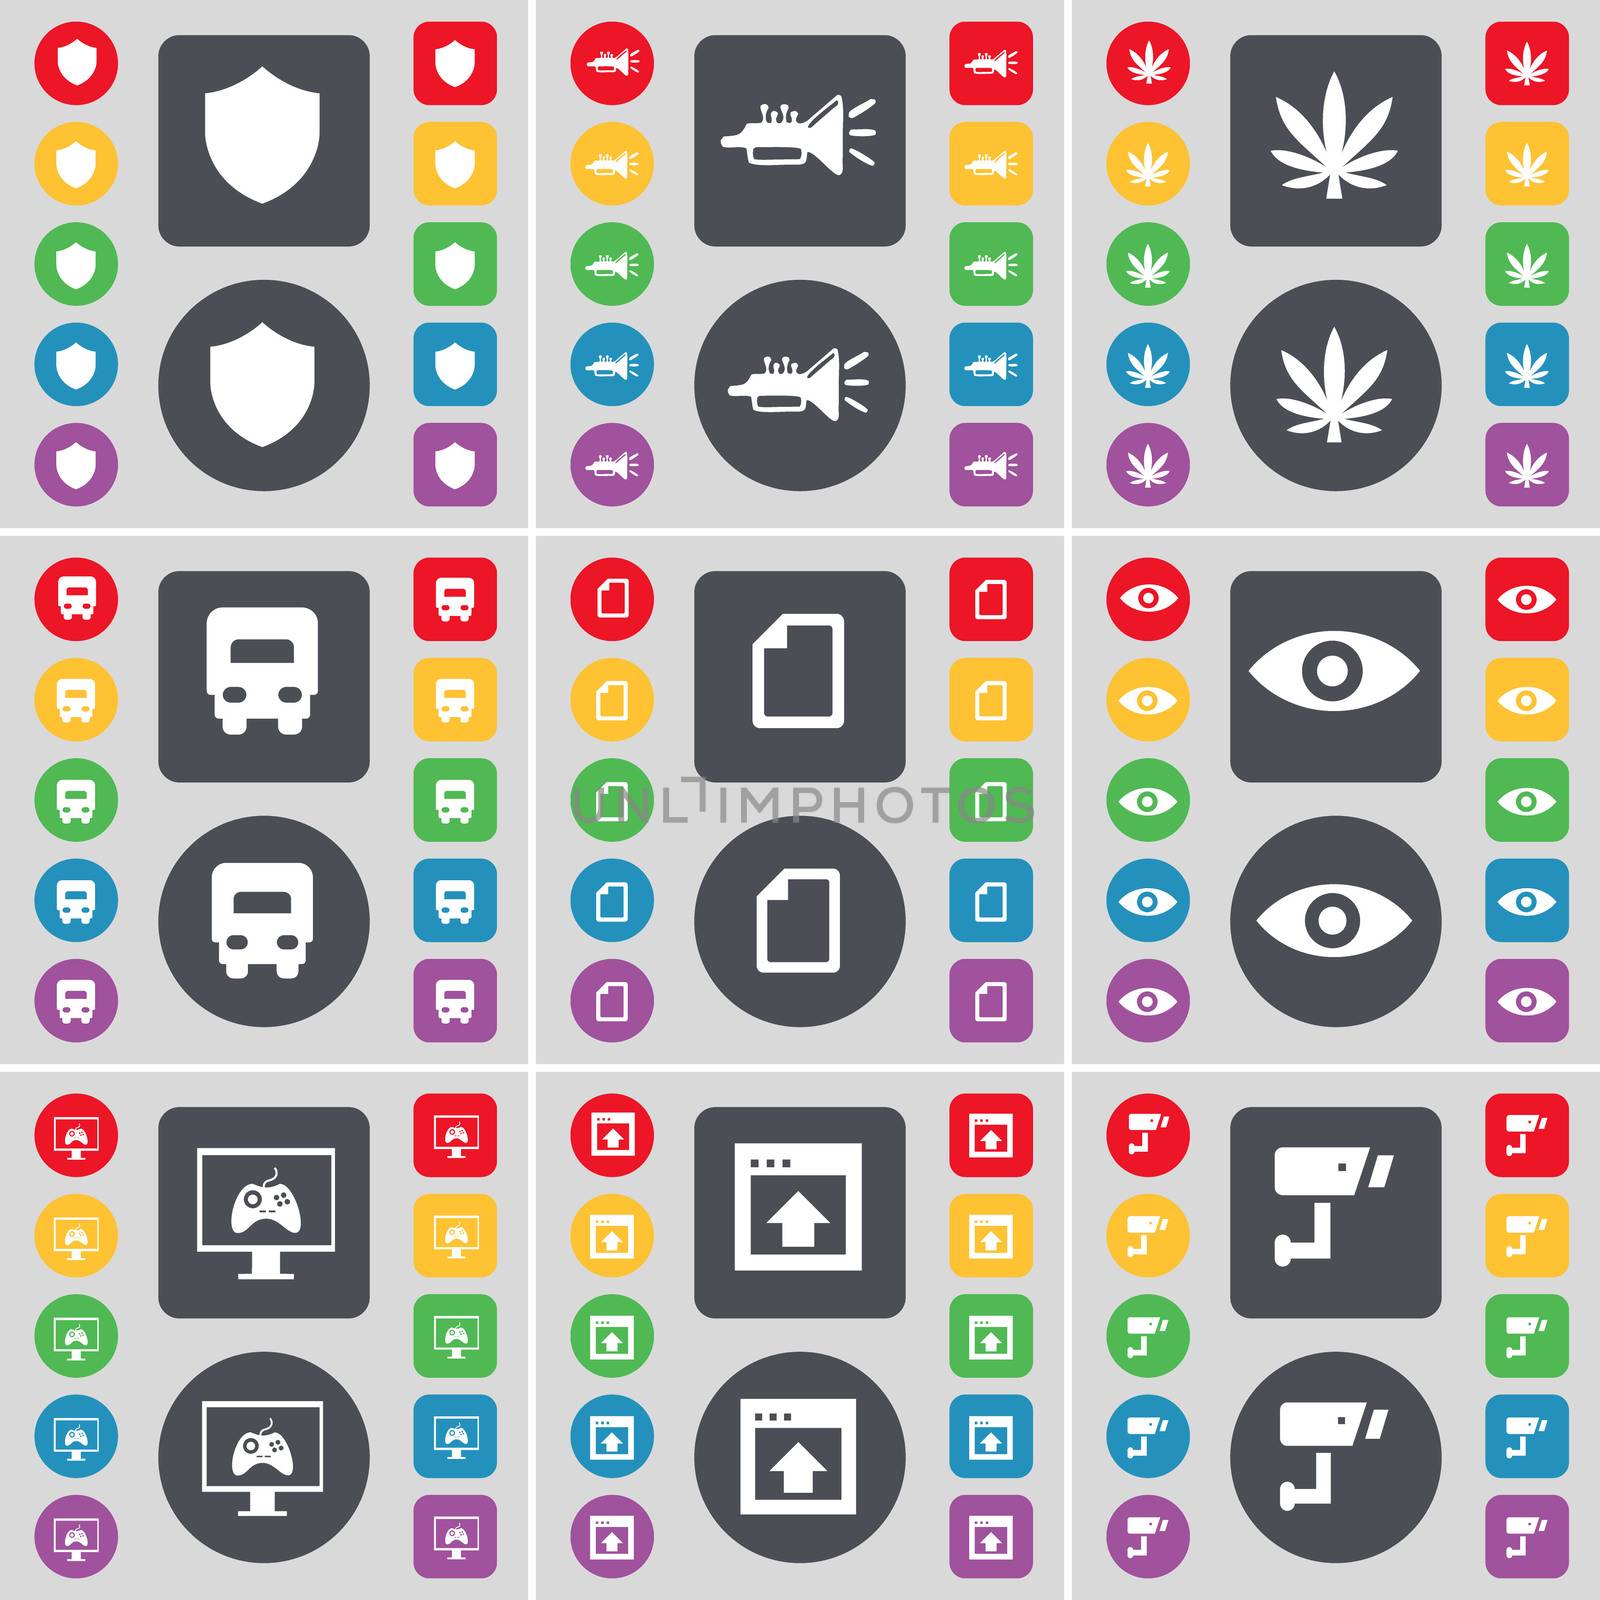 Badge, Trumped, Marijuana, Truck, File, Vision, Monitor, Window, CCTV icon symbol. A large set of flat, colored buttons for your design.  by serhii_lohvyniuk